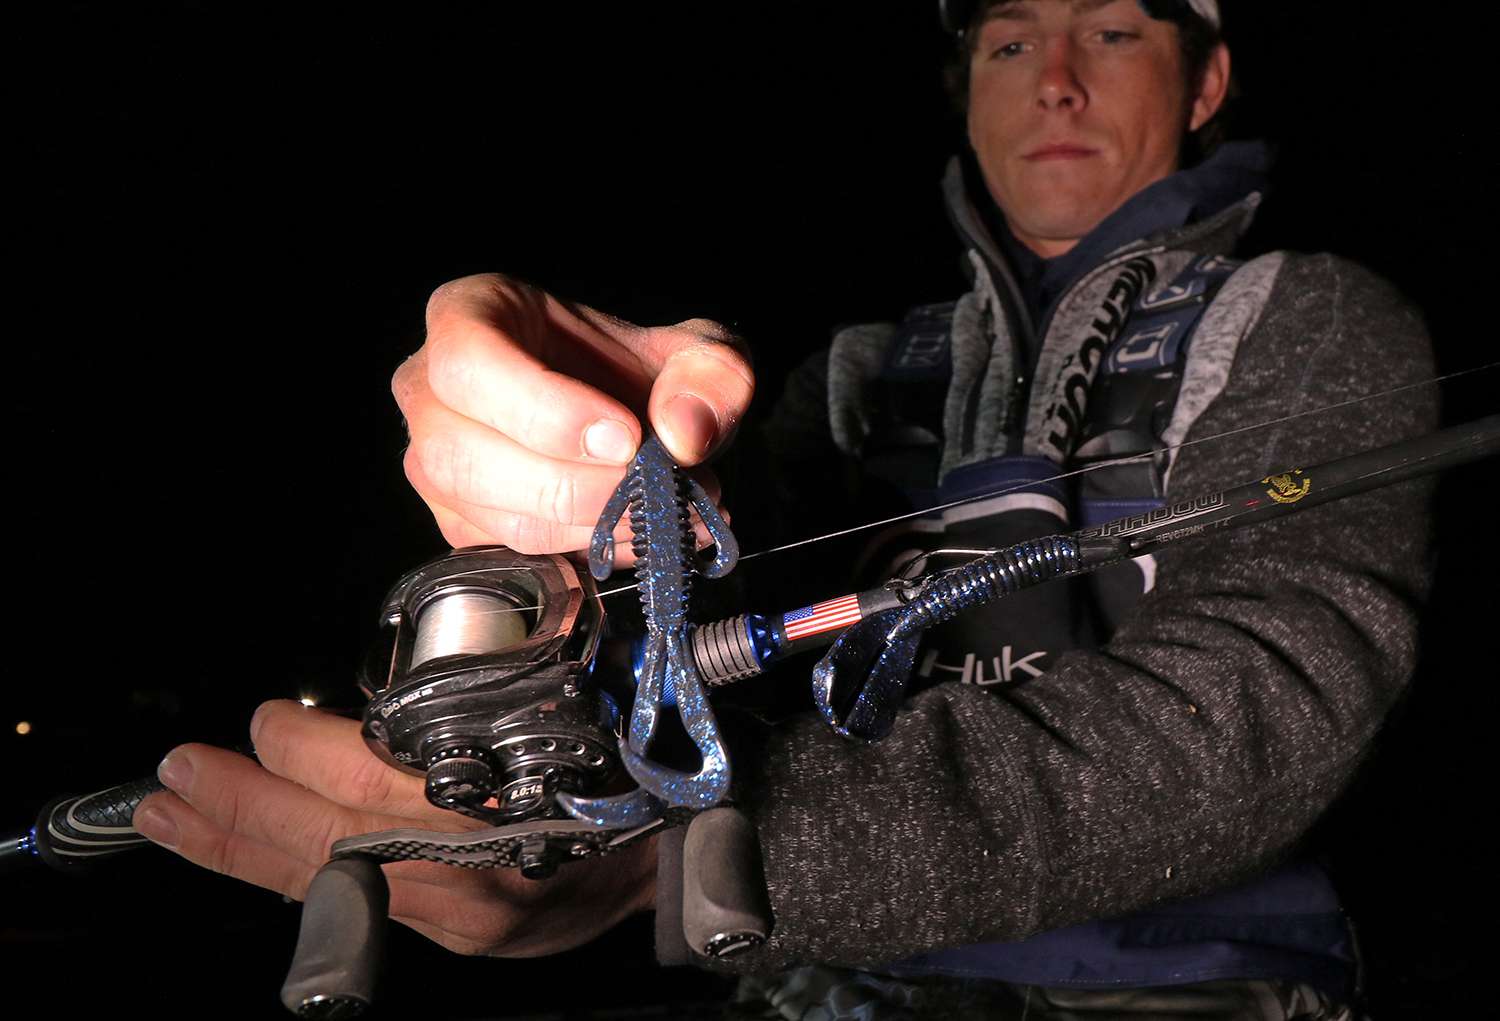 To finish tenth Greg Vance used the flipping tactic to score with these baits. A 3.5-inch V&M J-Bug and 4-inch Strike King Rage Twin Tail Menace Grub were the choices. He rigged both to 4/0 straight shank flipping hooks and 5/16-ounce weights. 